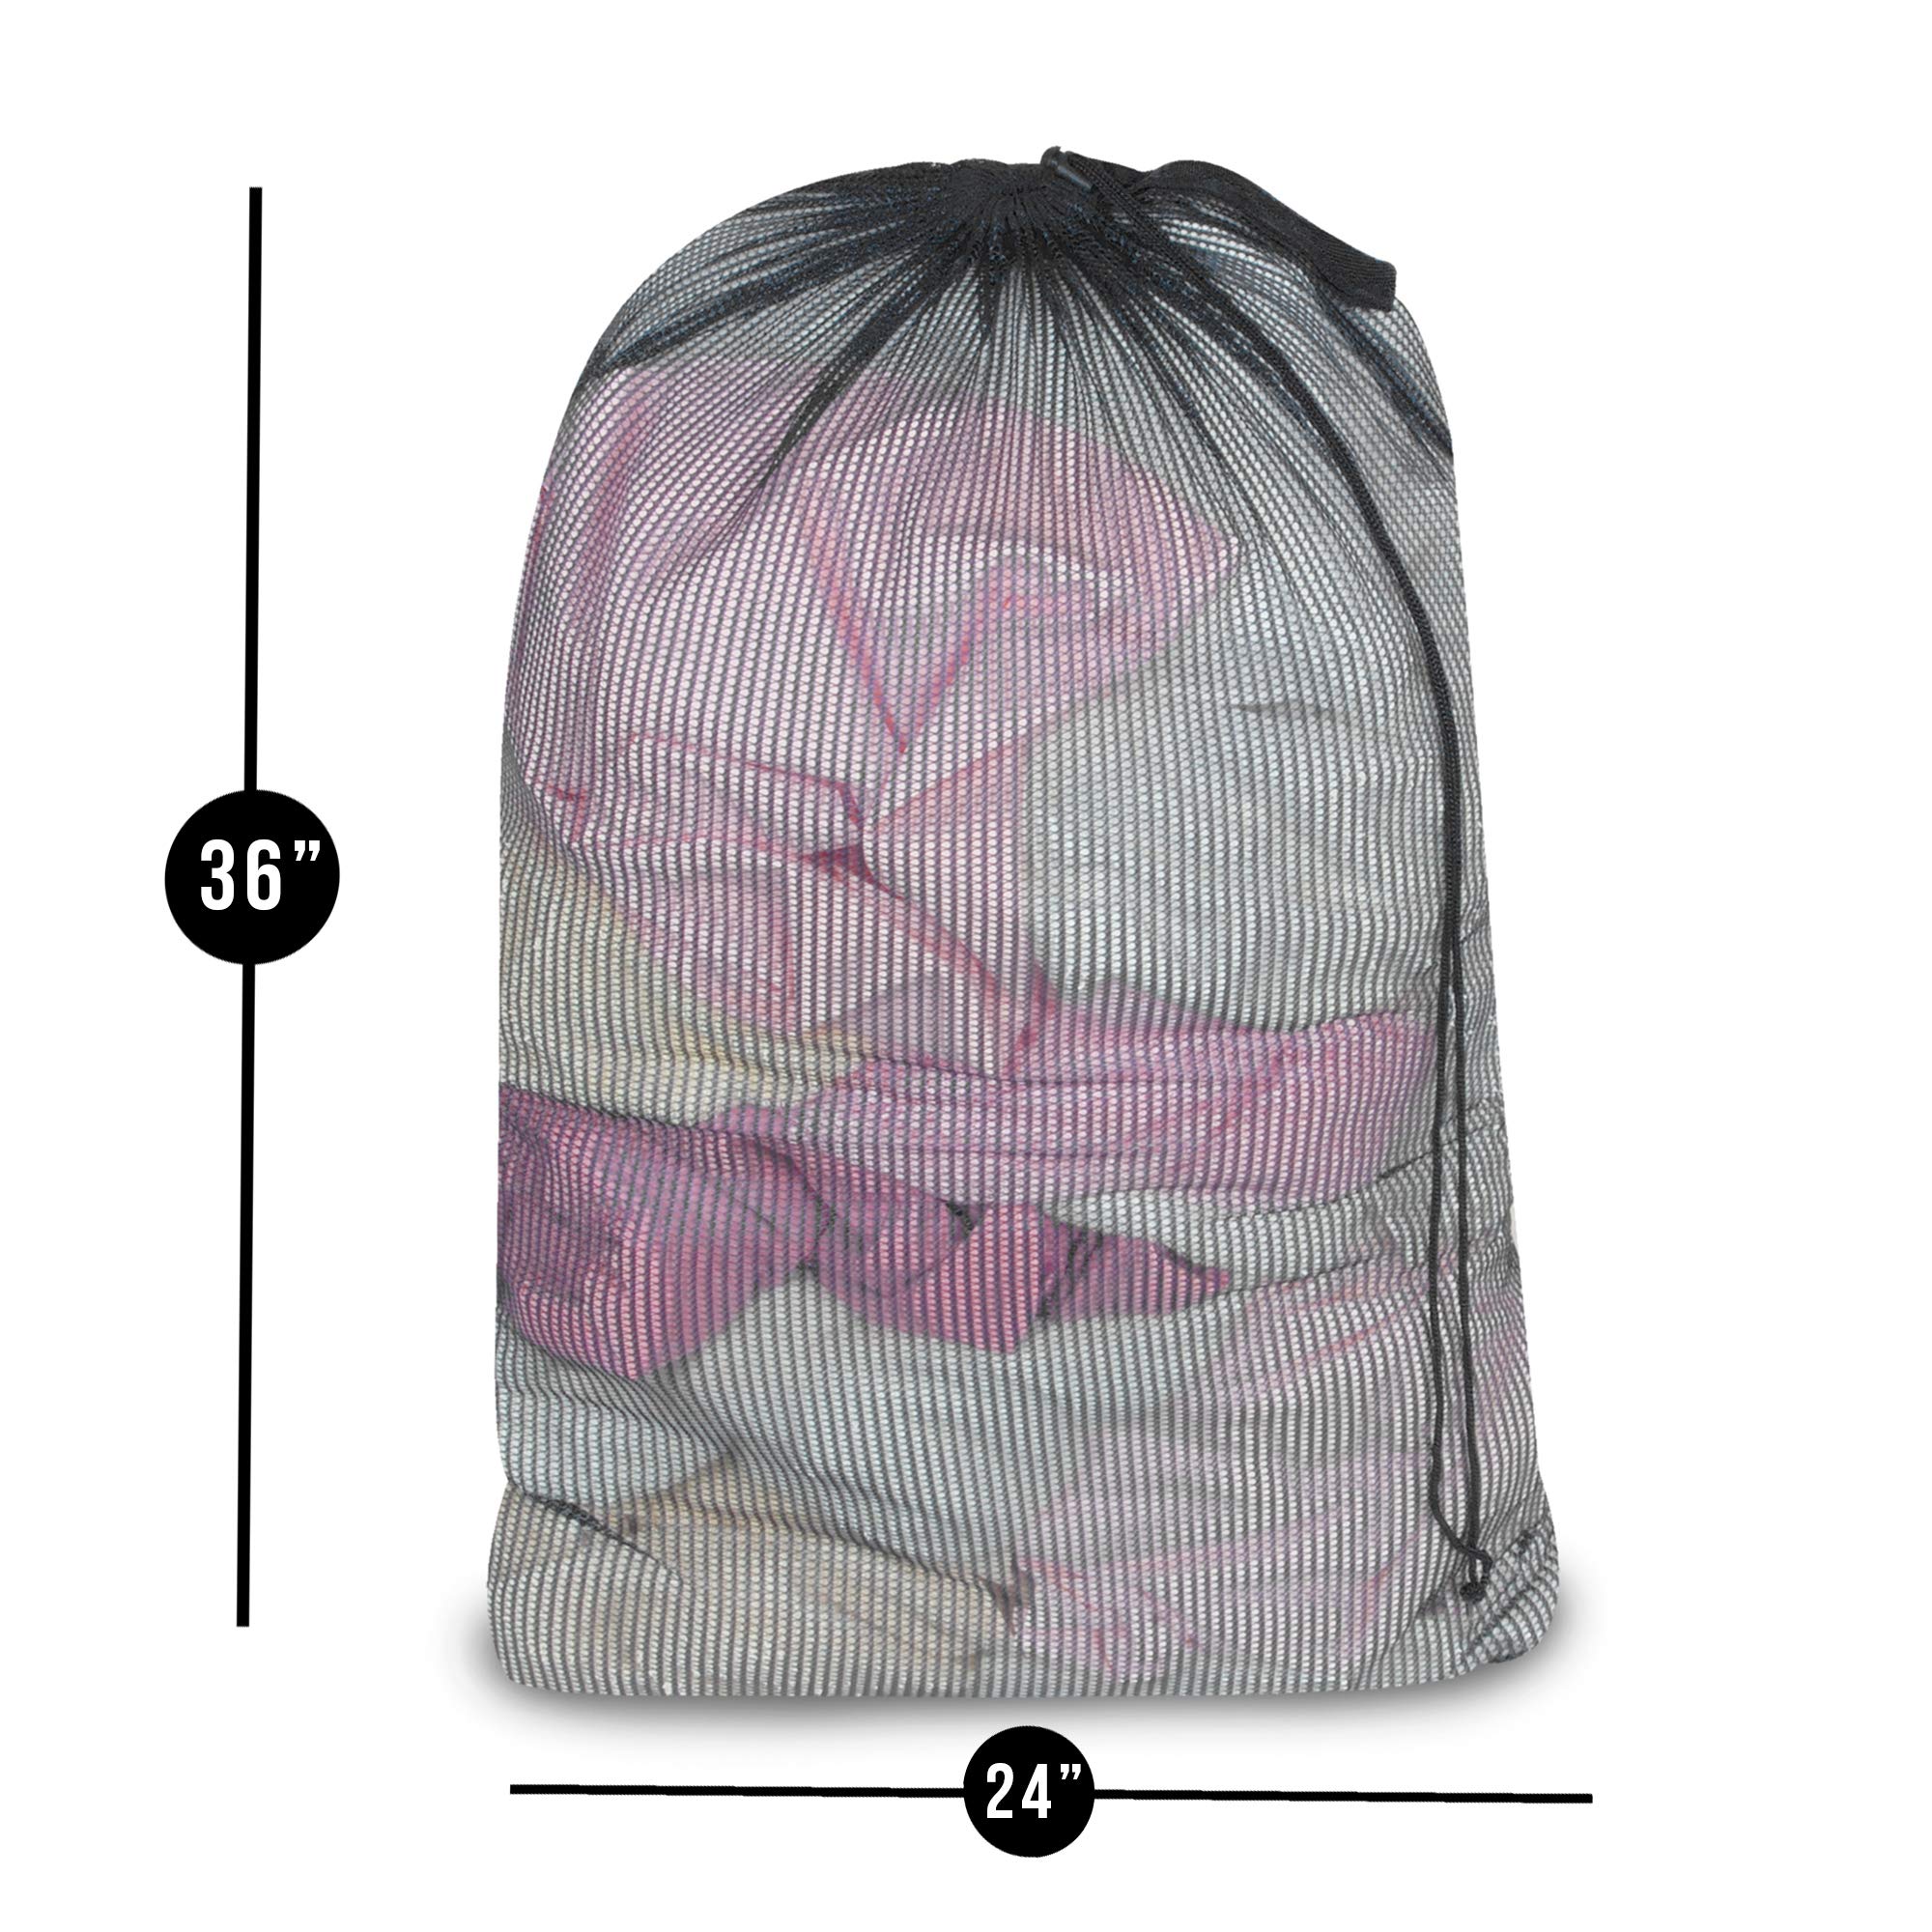 Mesh Laundry Bag with Handle and Push Lock Drawstring - Multiple Options - Smart Design® 18